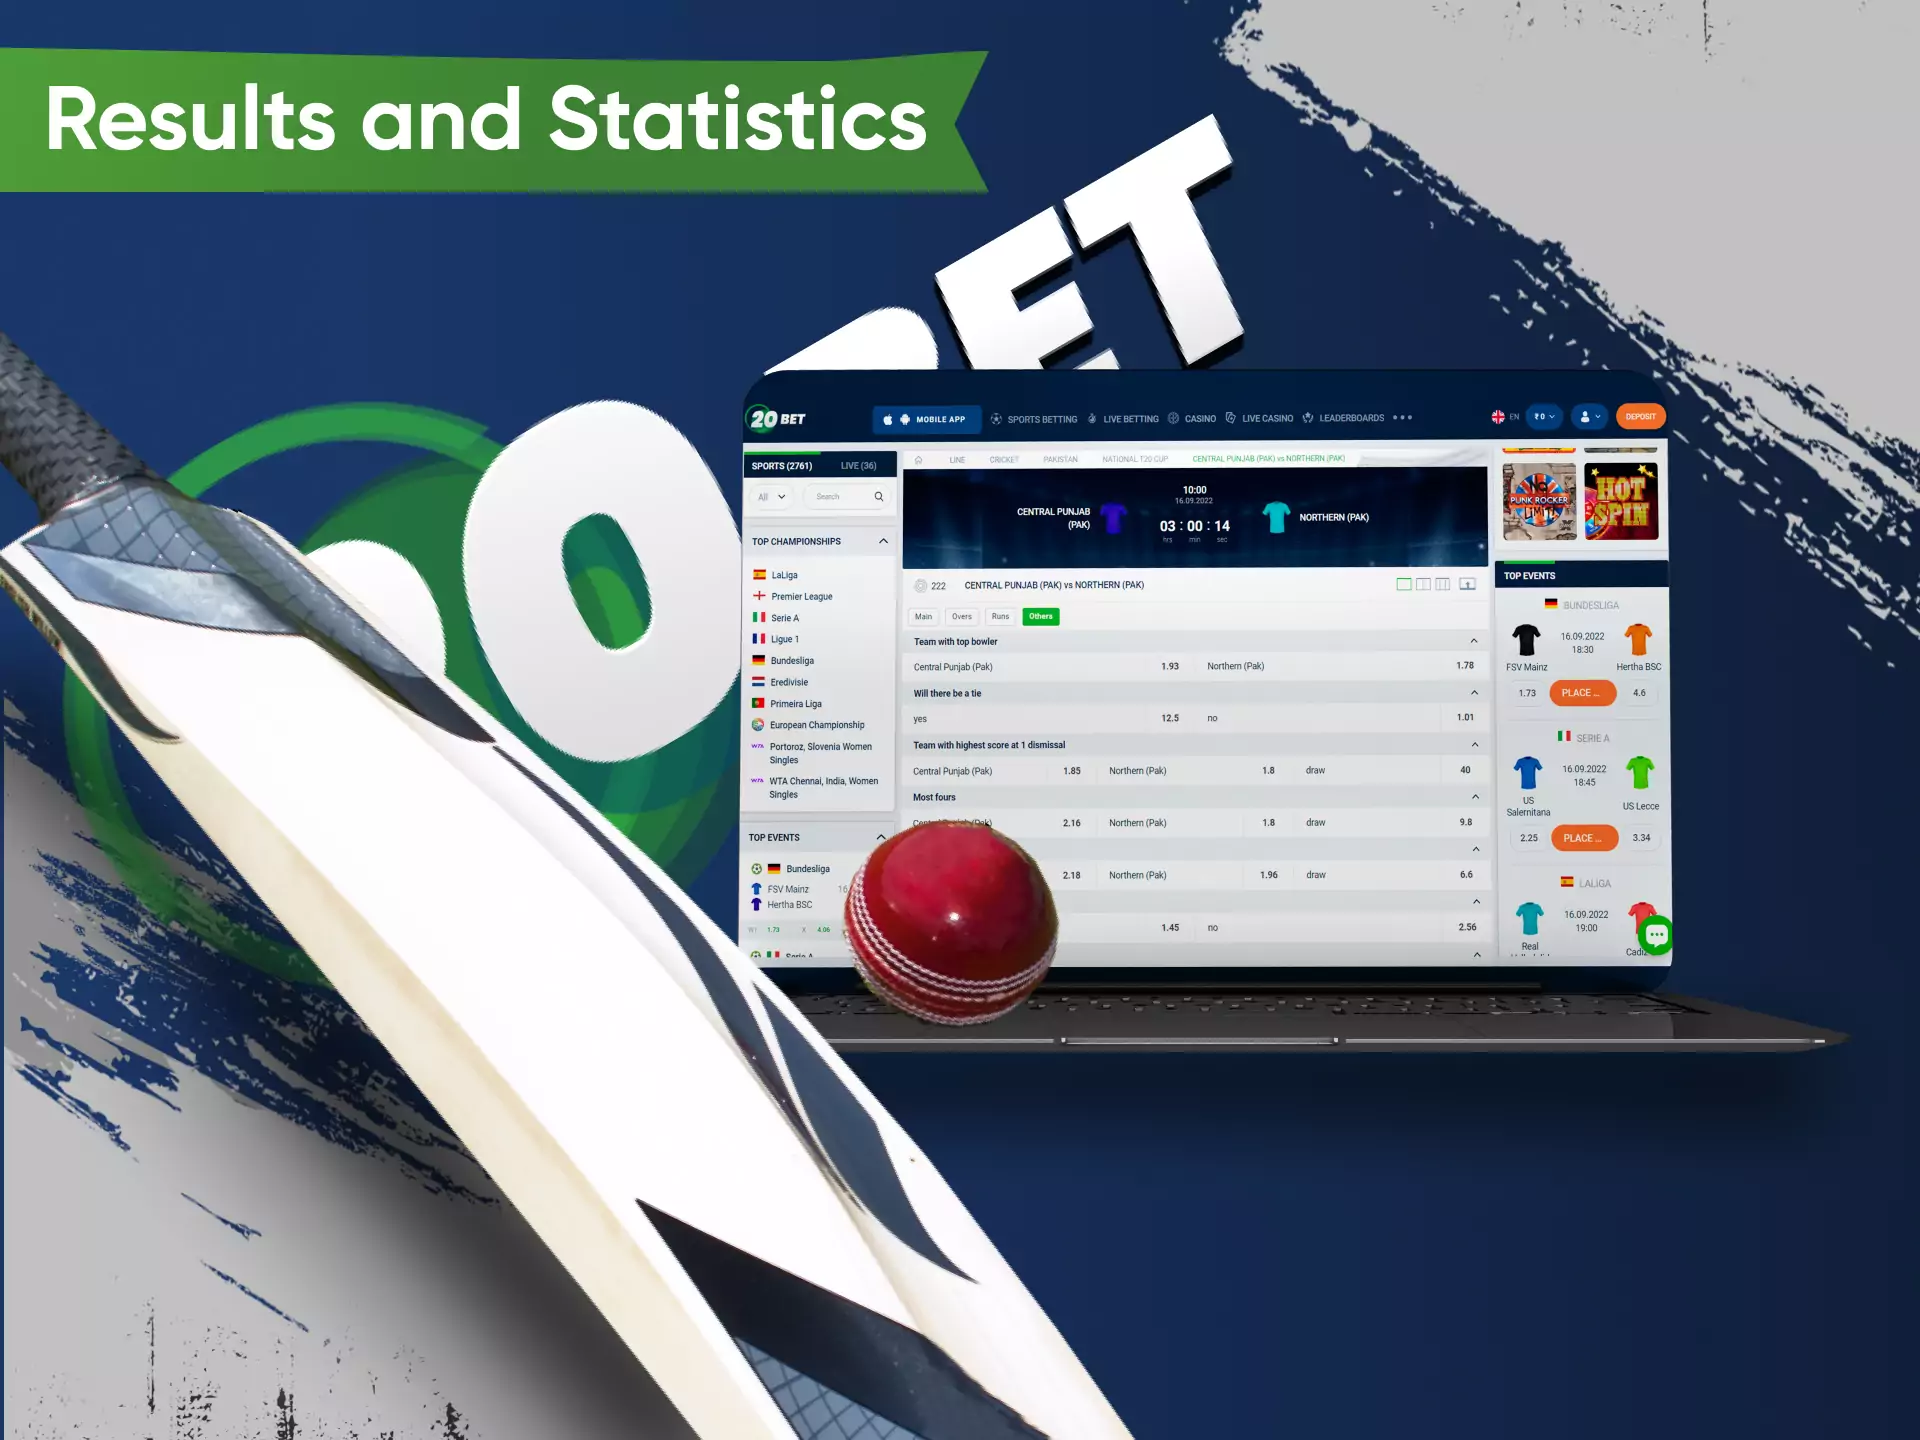 On 20bet, you can check results right on the site.